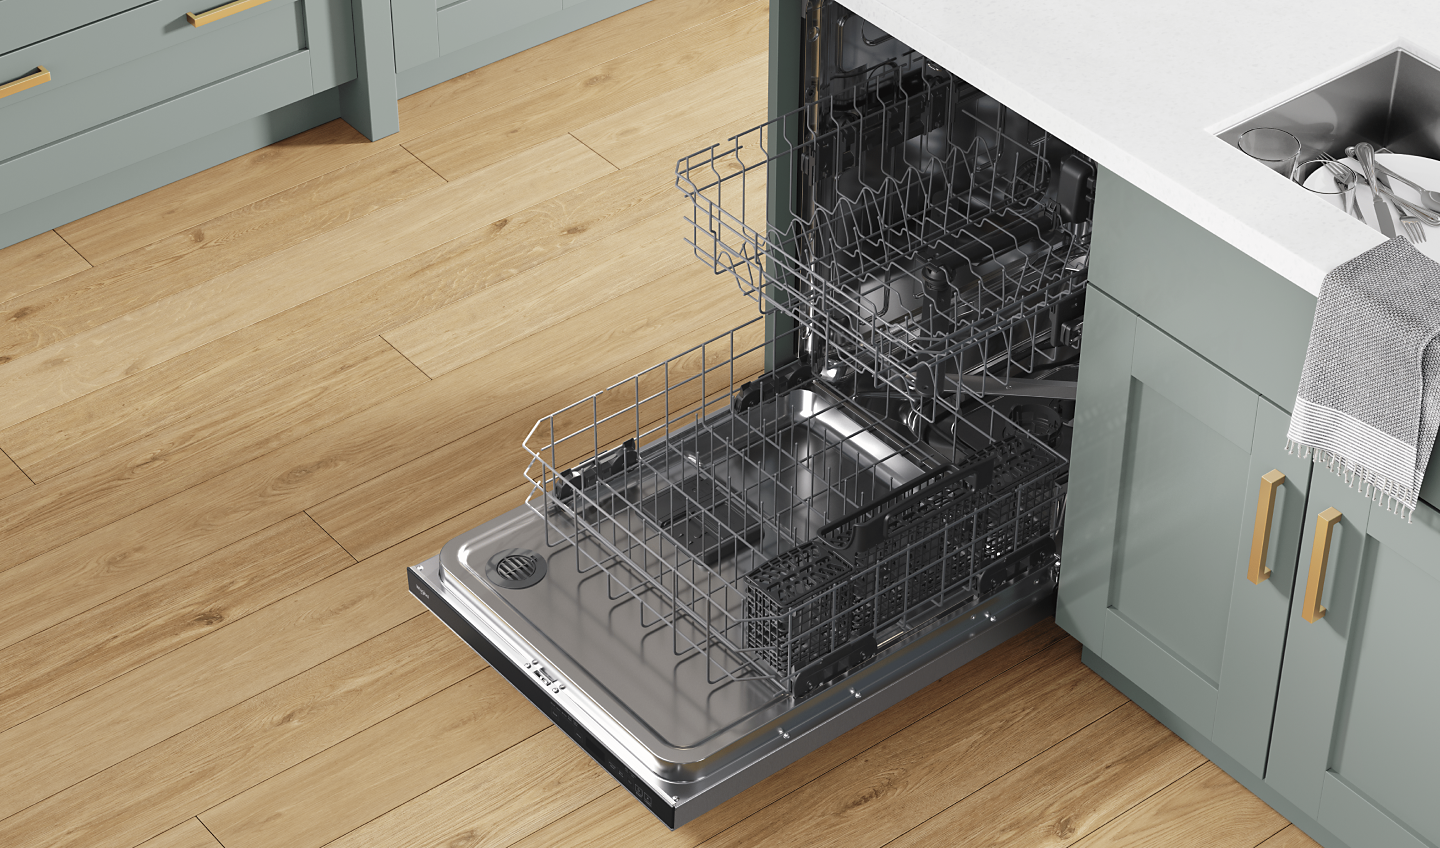 An empty dishwasher with empty racks extending out